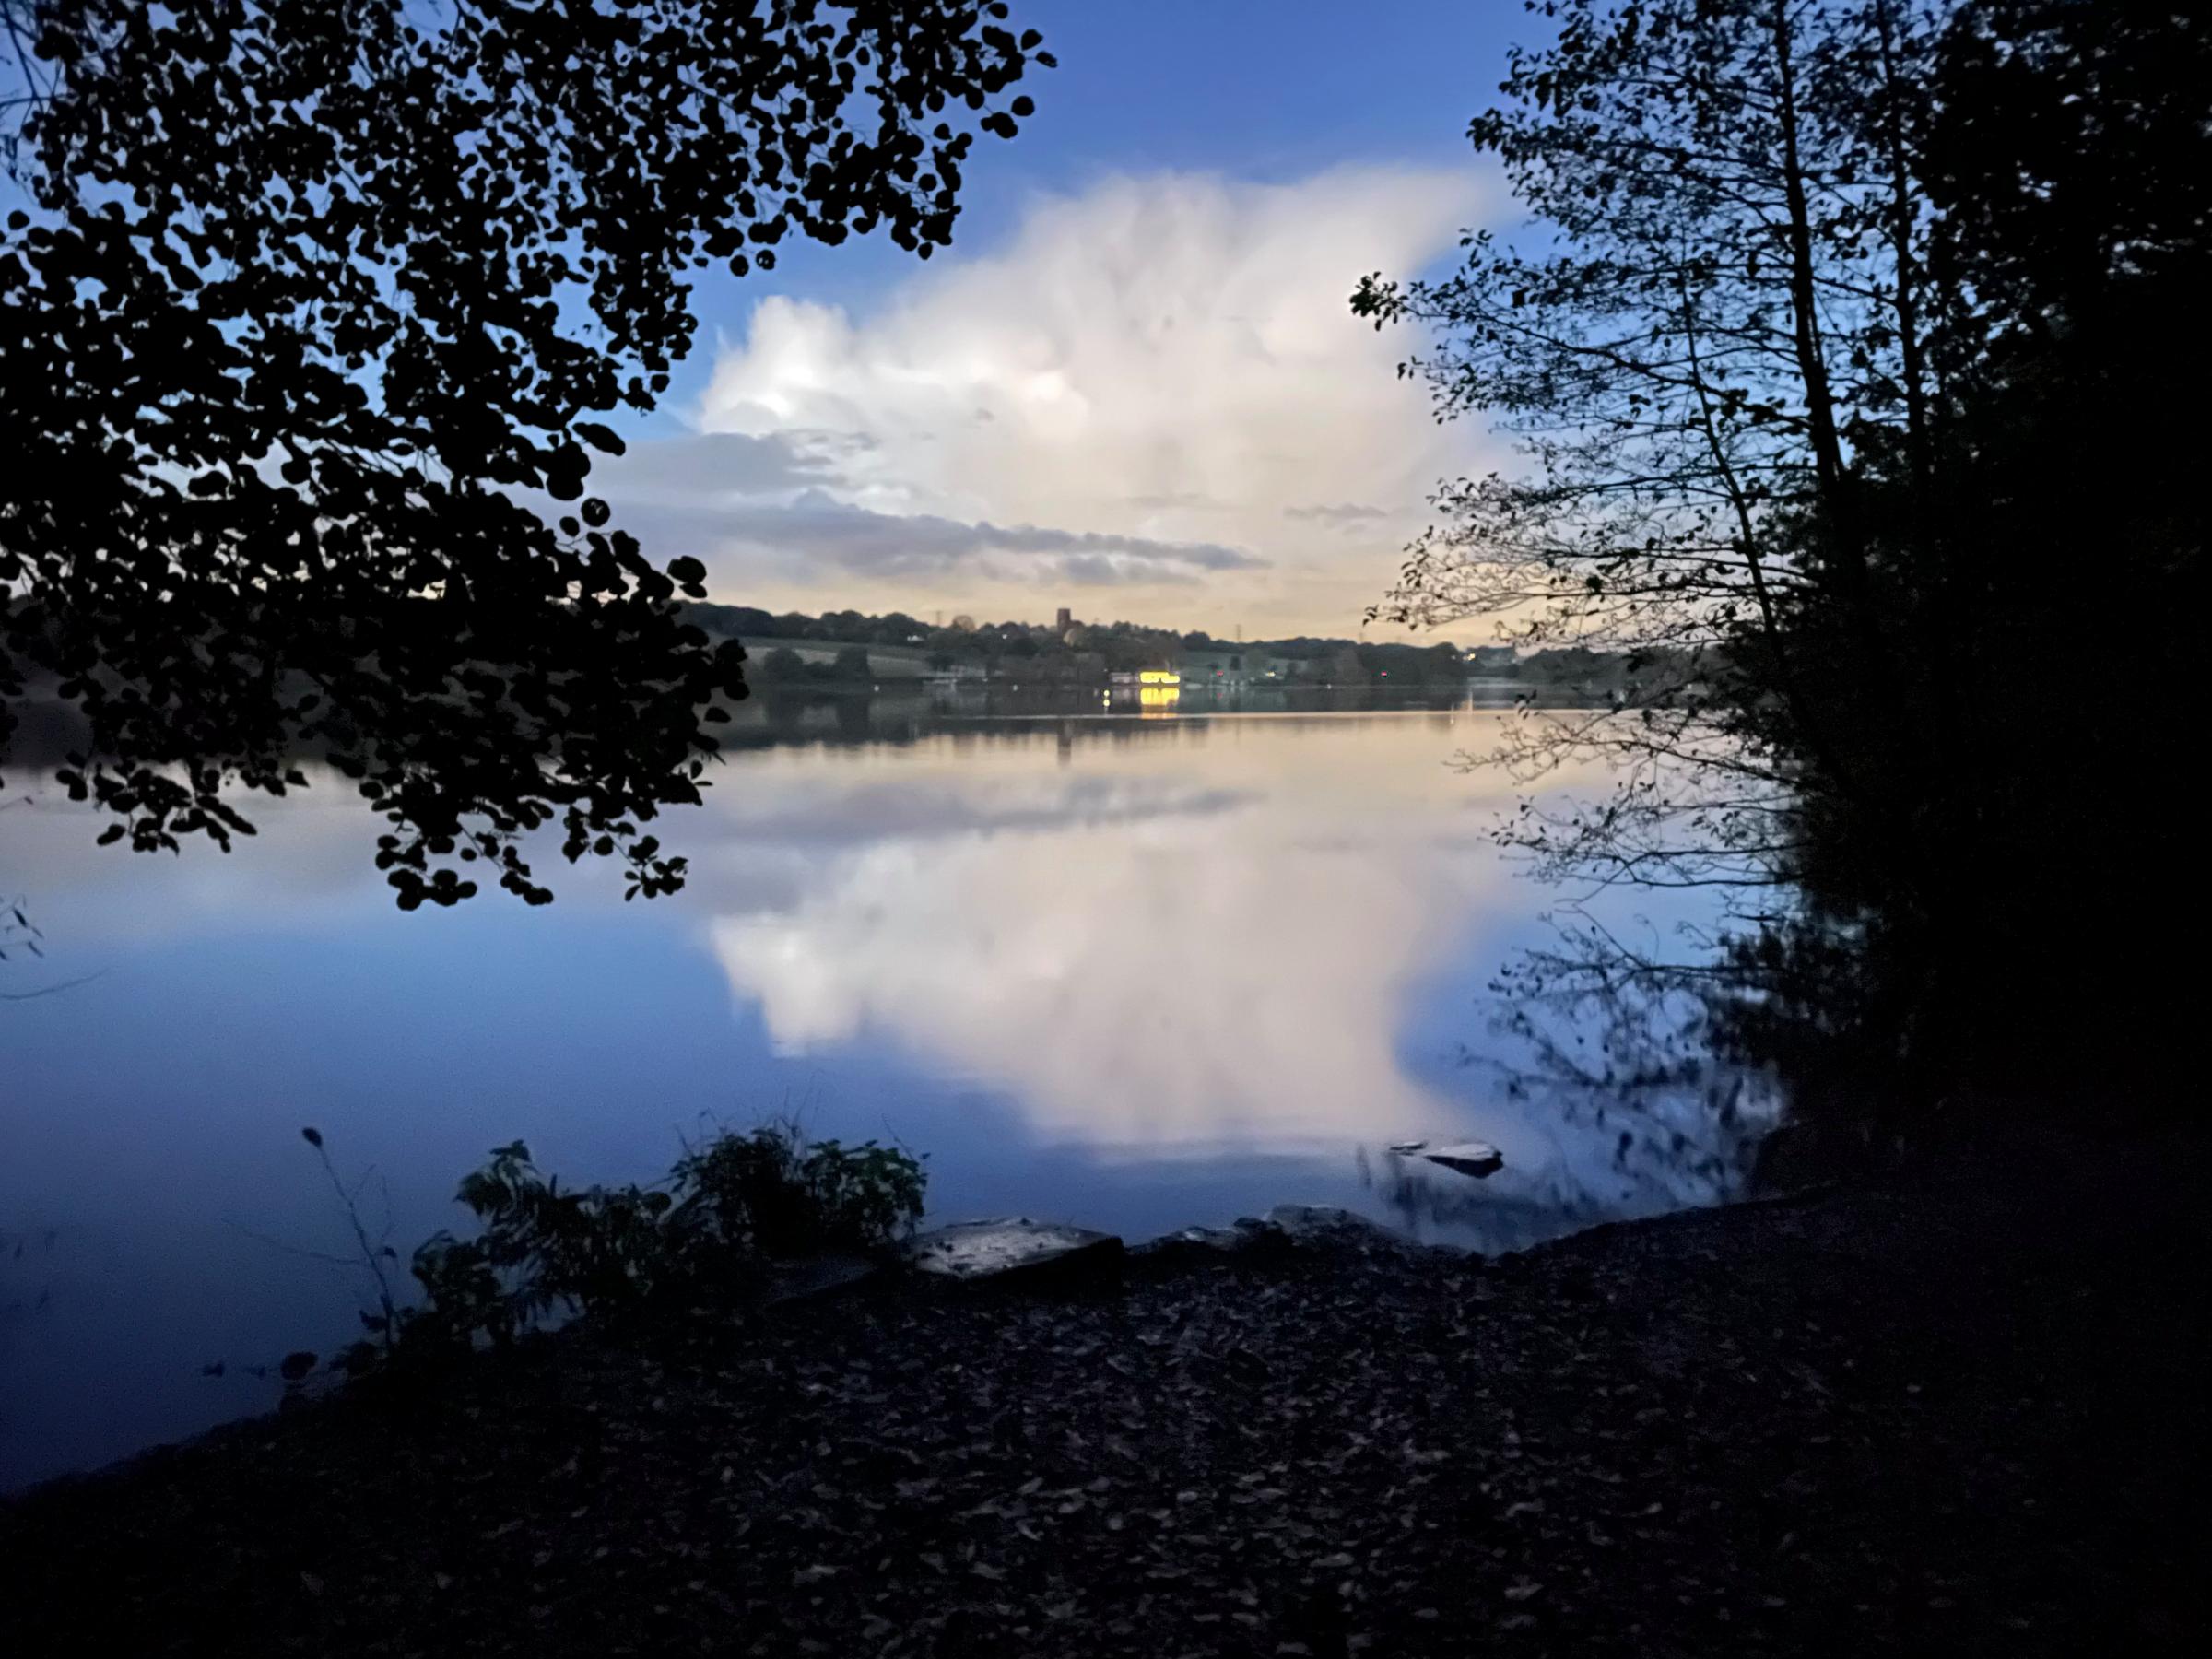 Early evening at Marbury Mere by Andrew Pratt